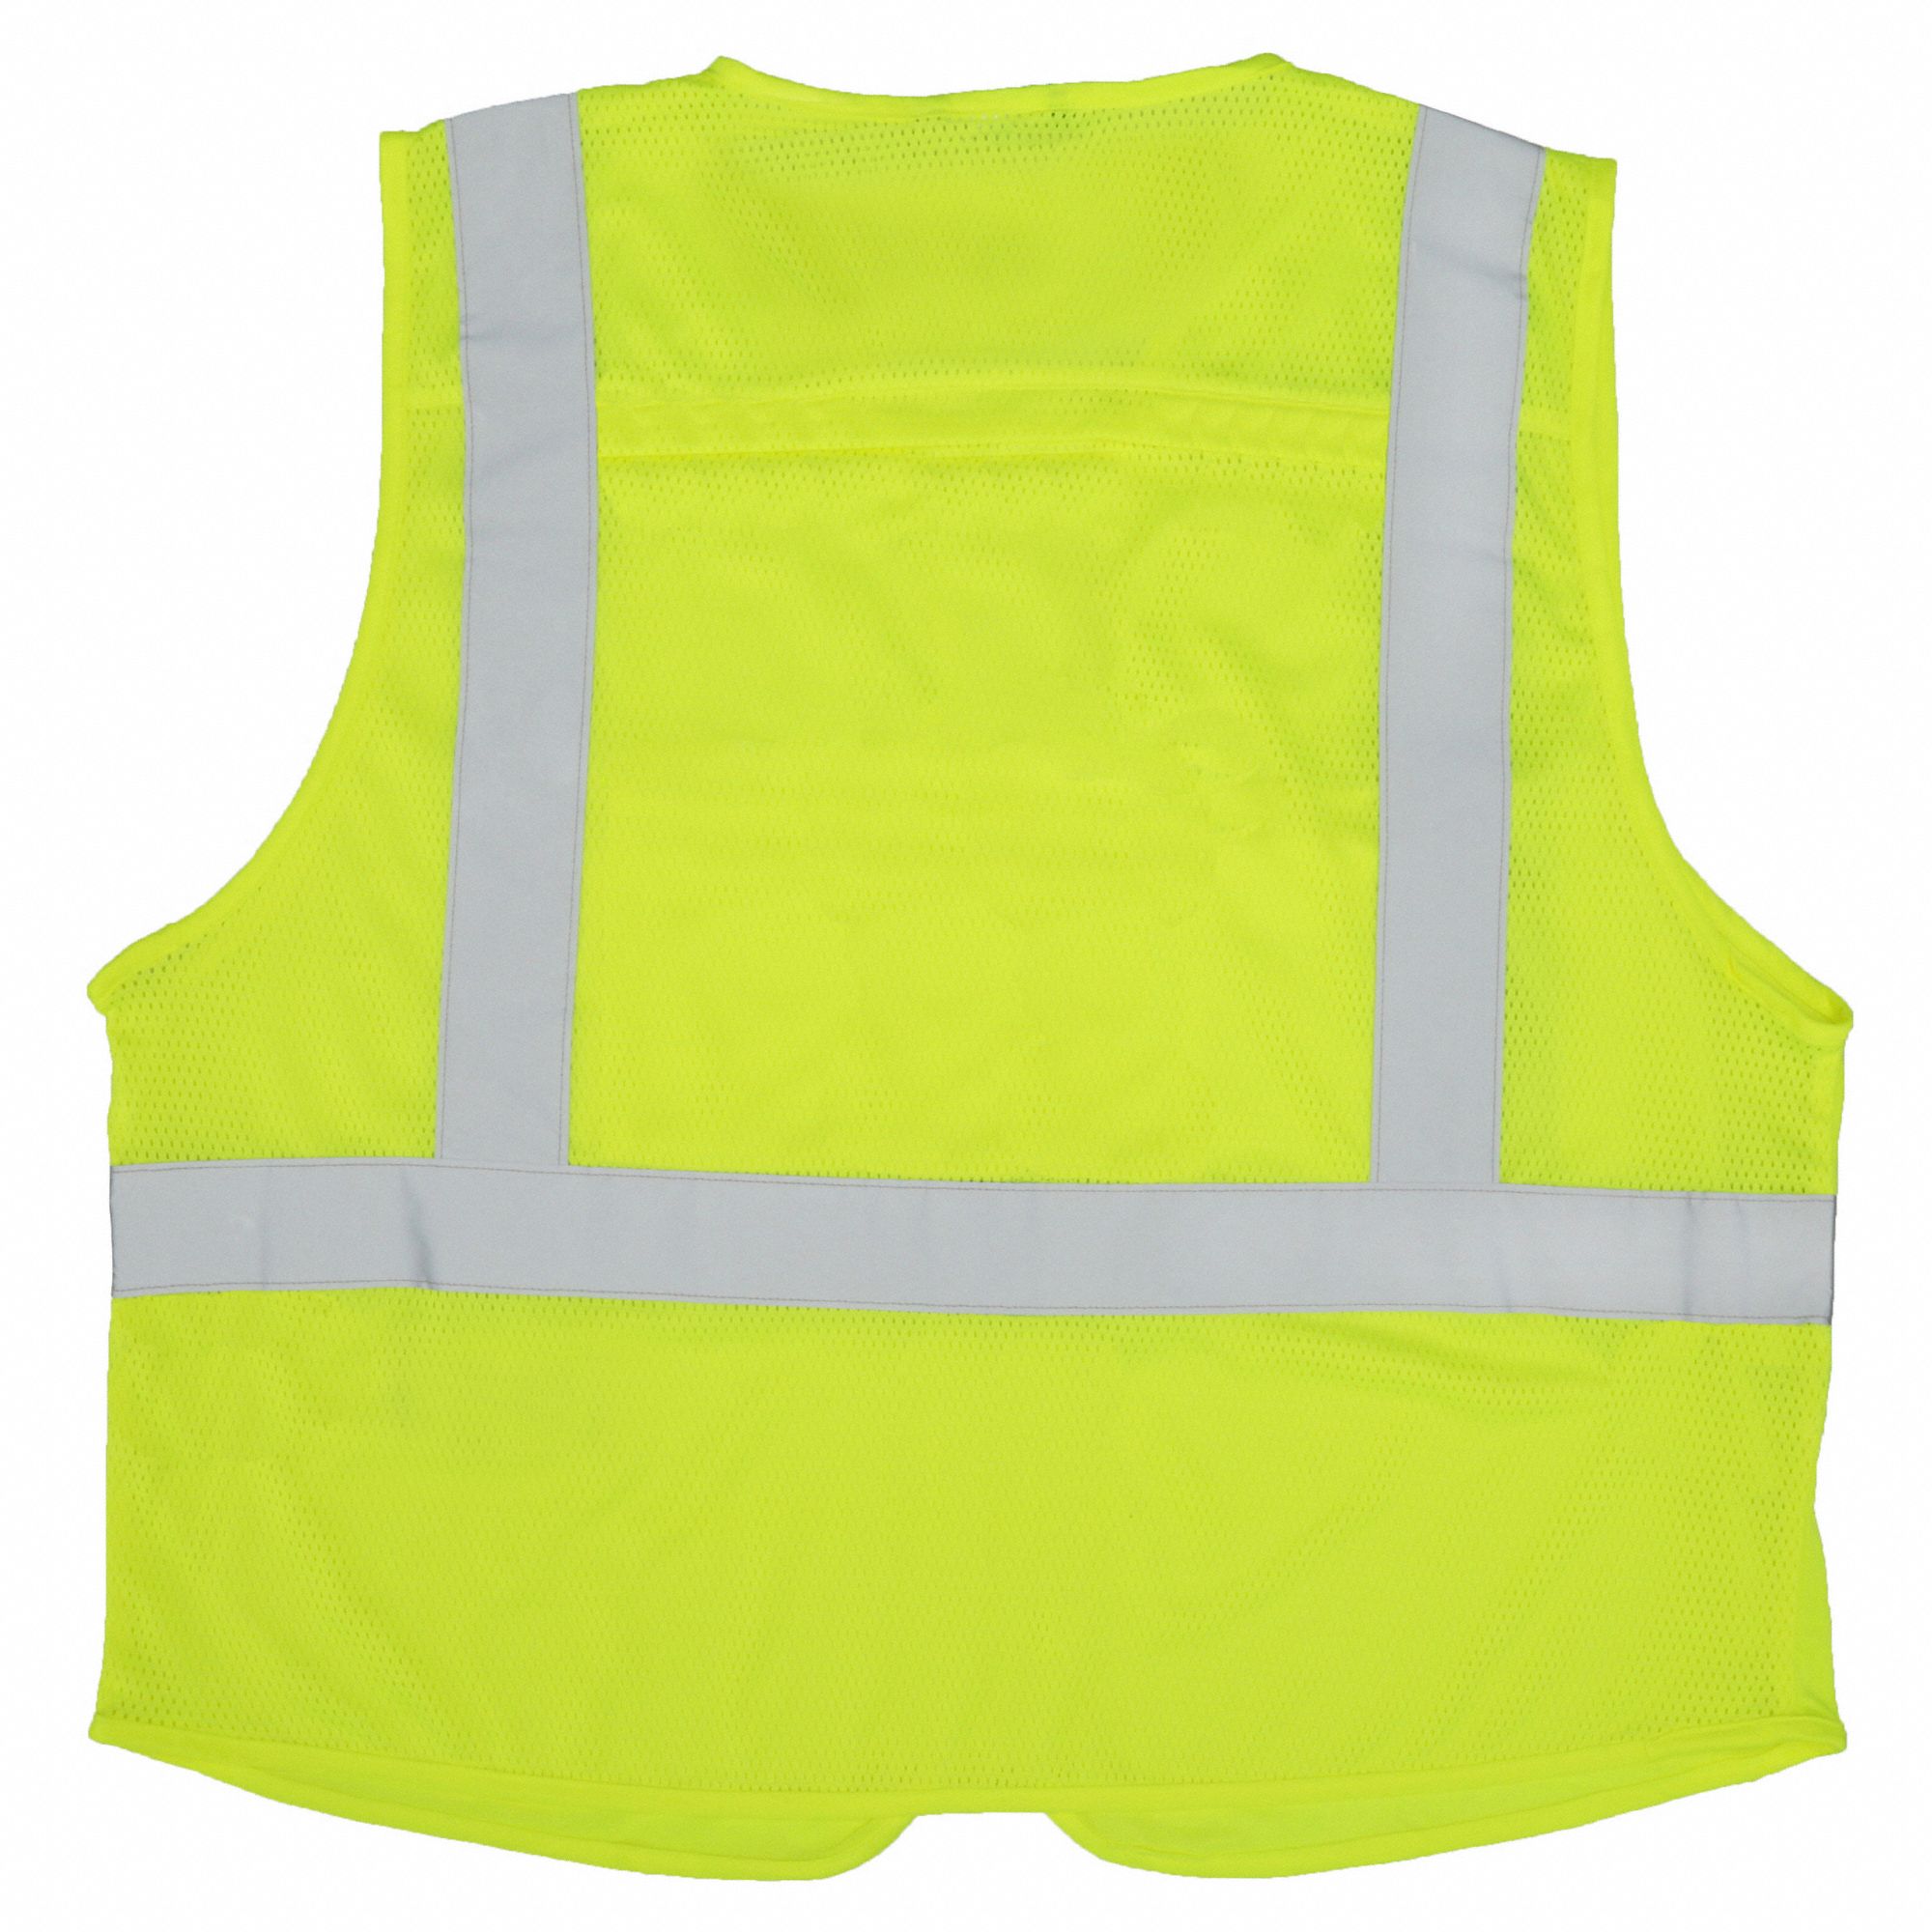 Industrial Safety Vest Reflective Safety Jacket Yellow High Visibility Safety Vest Jacket Safety Vest With Reflective Strips No Sleeve For Work Outdoor Activity Reflective Safety Vest For Running Ref